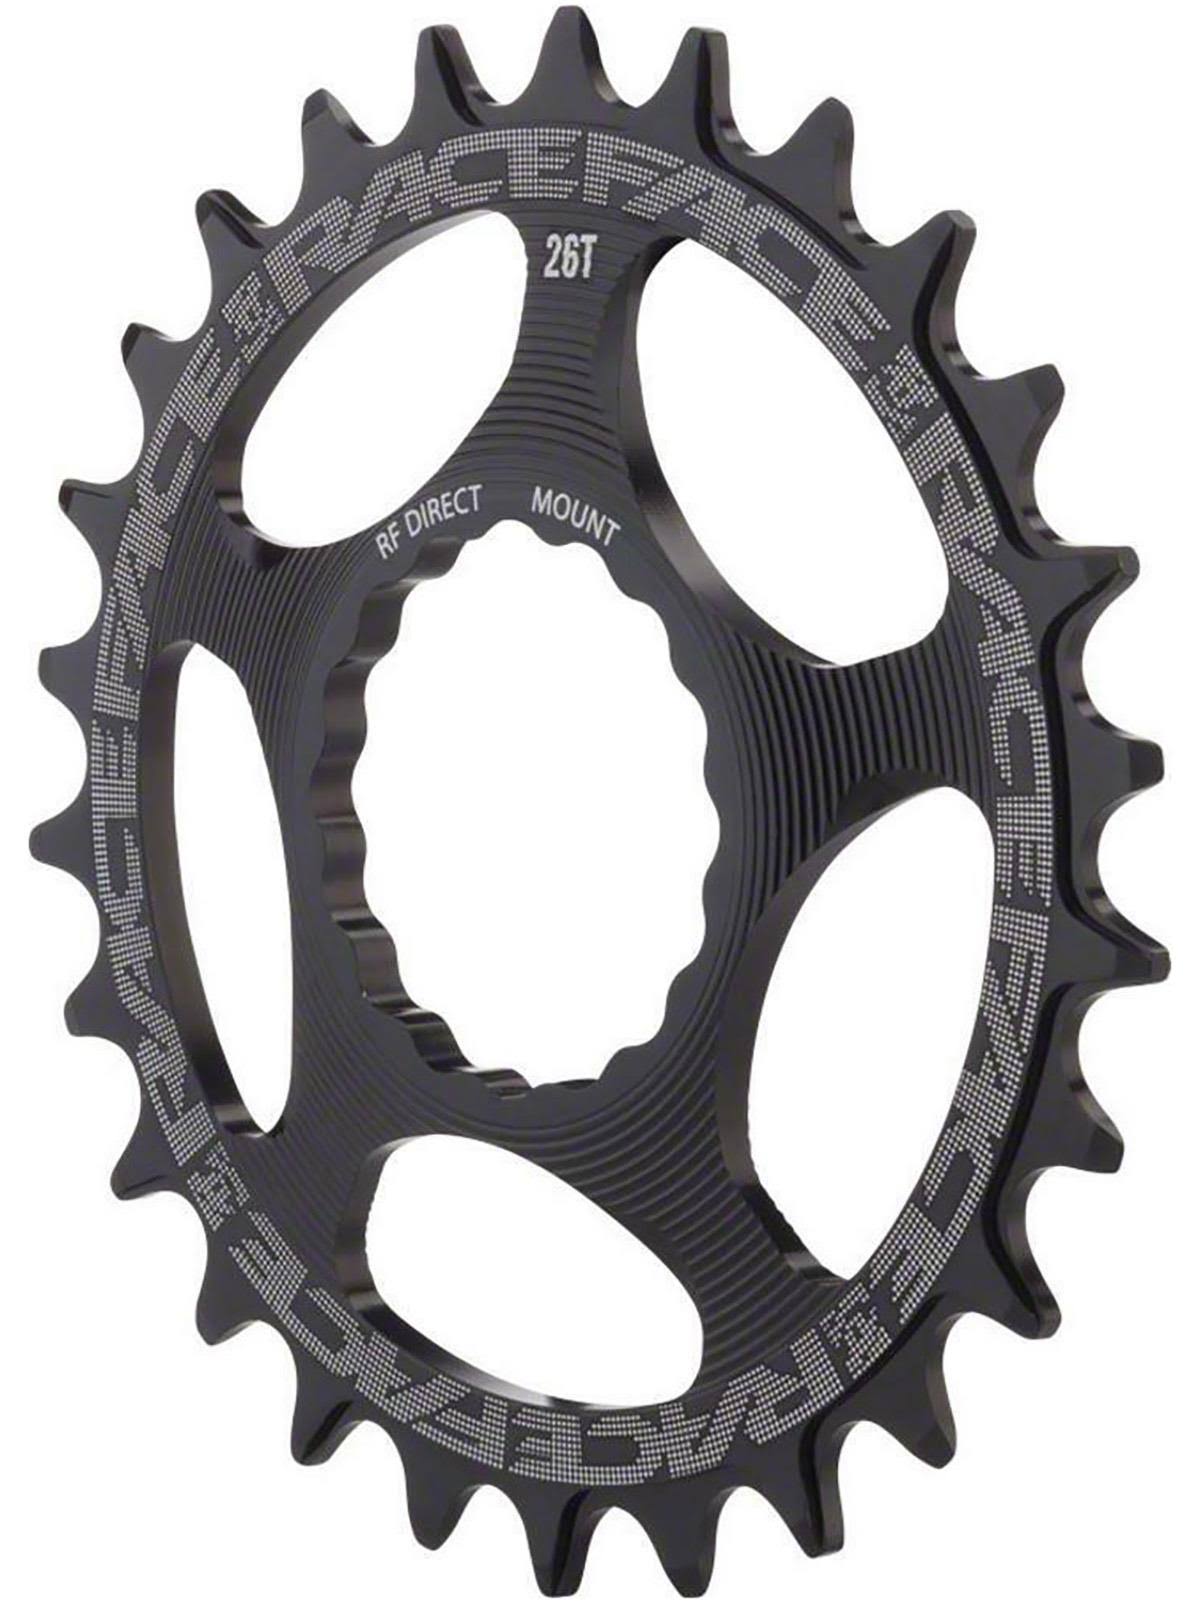 Race Face Cinch Narrow Wide Direct Mount Chainring - Black, 34T